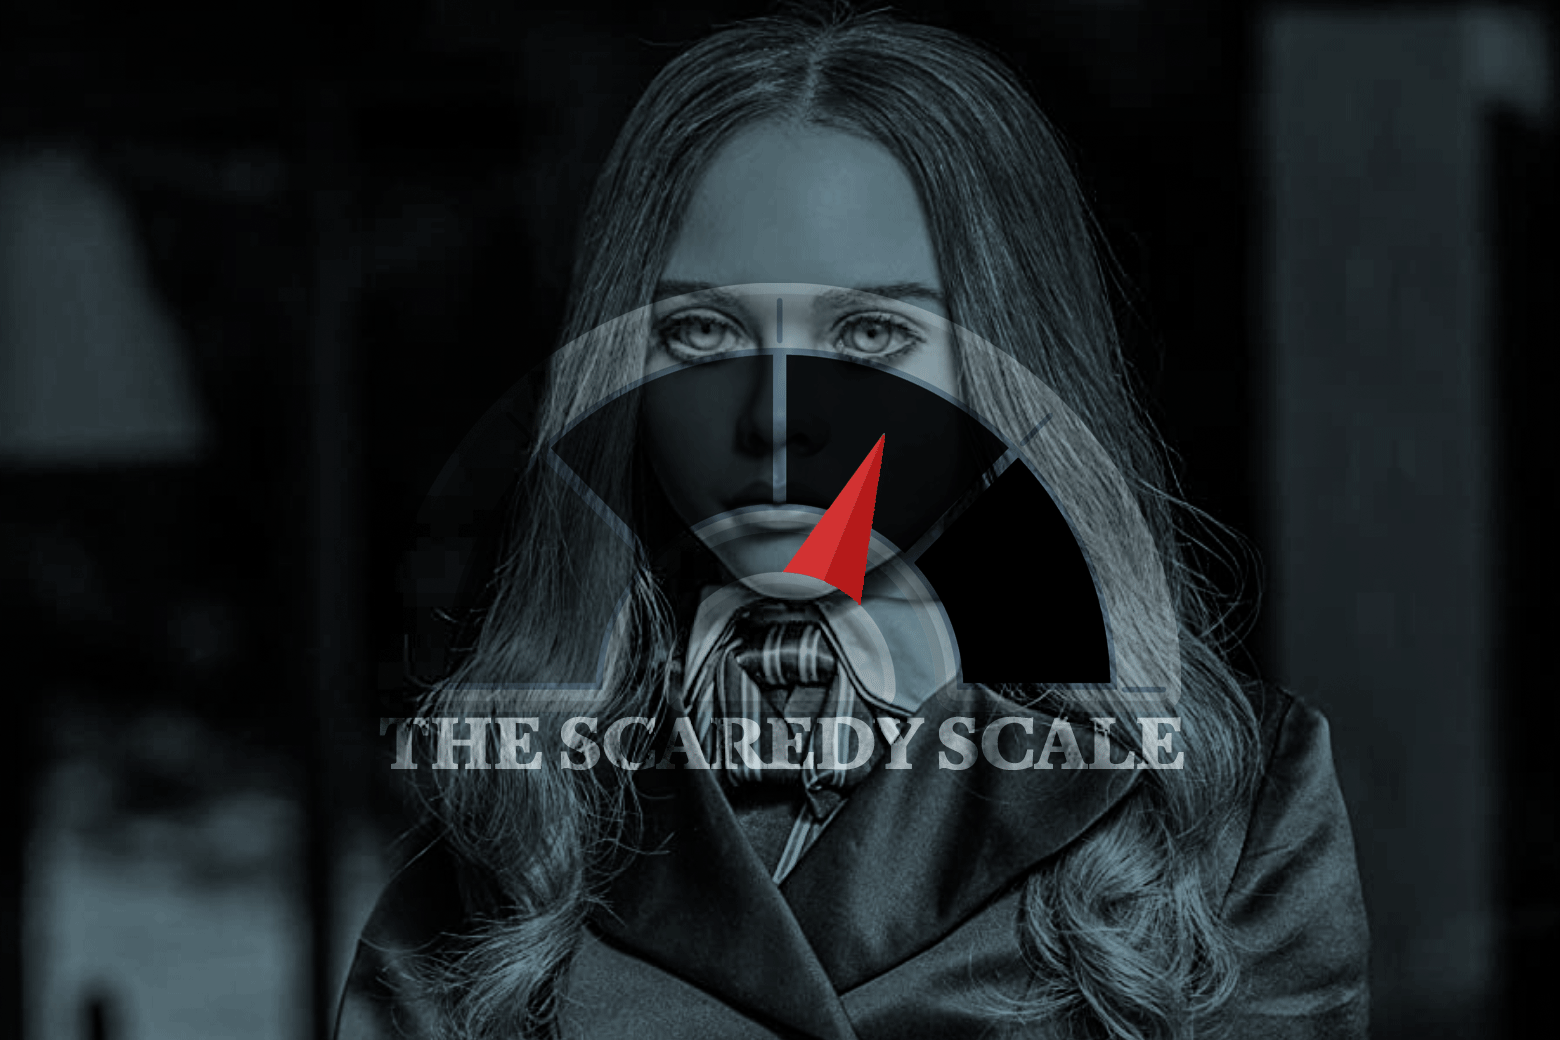 The dead eyes of a robot doll stare out from over a posh schoolgirl outfit. Photoshopped over the image, a GIF of a twitching meter with the words "The Scaredy Scale"